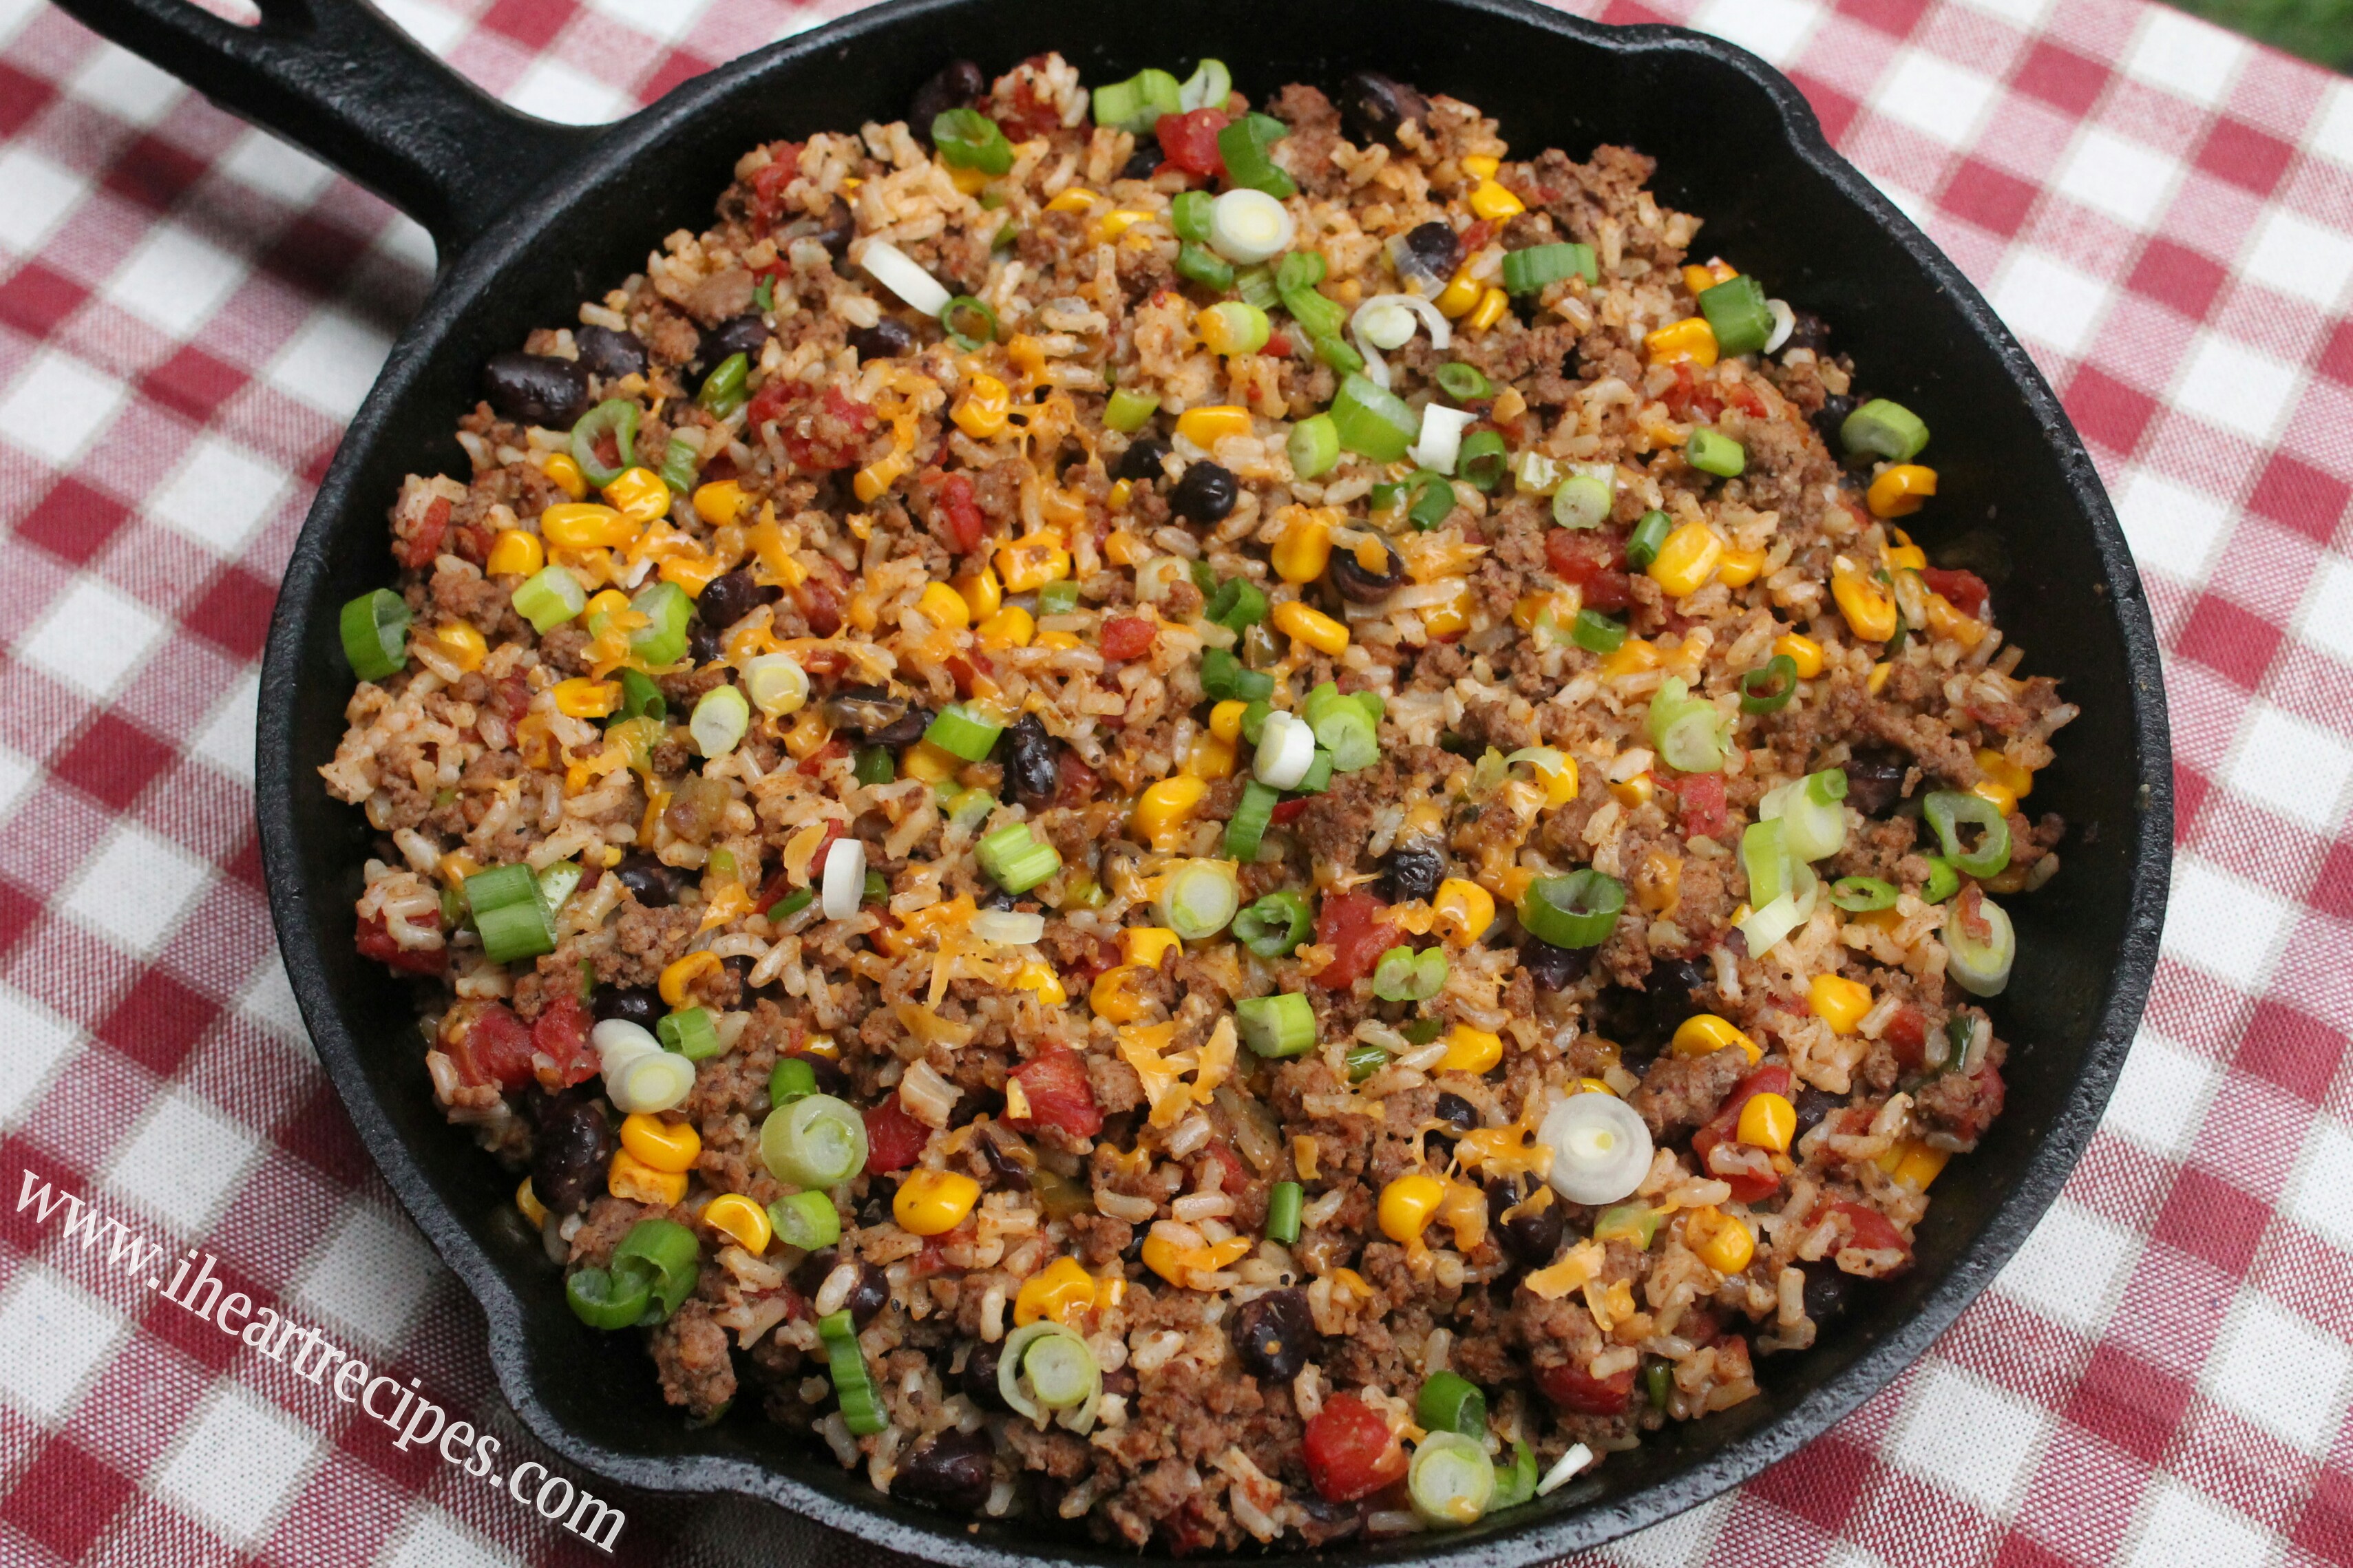 This Tex-Mex skillet dinner is a heart meal that can be ready in 30 minutes.